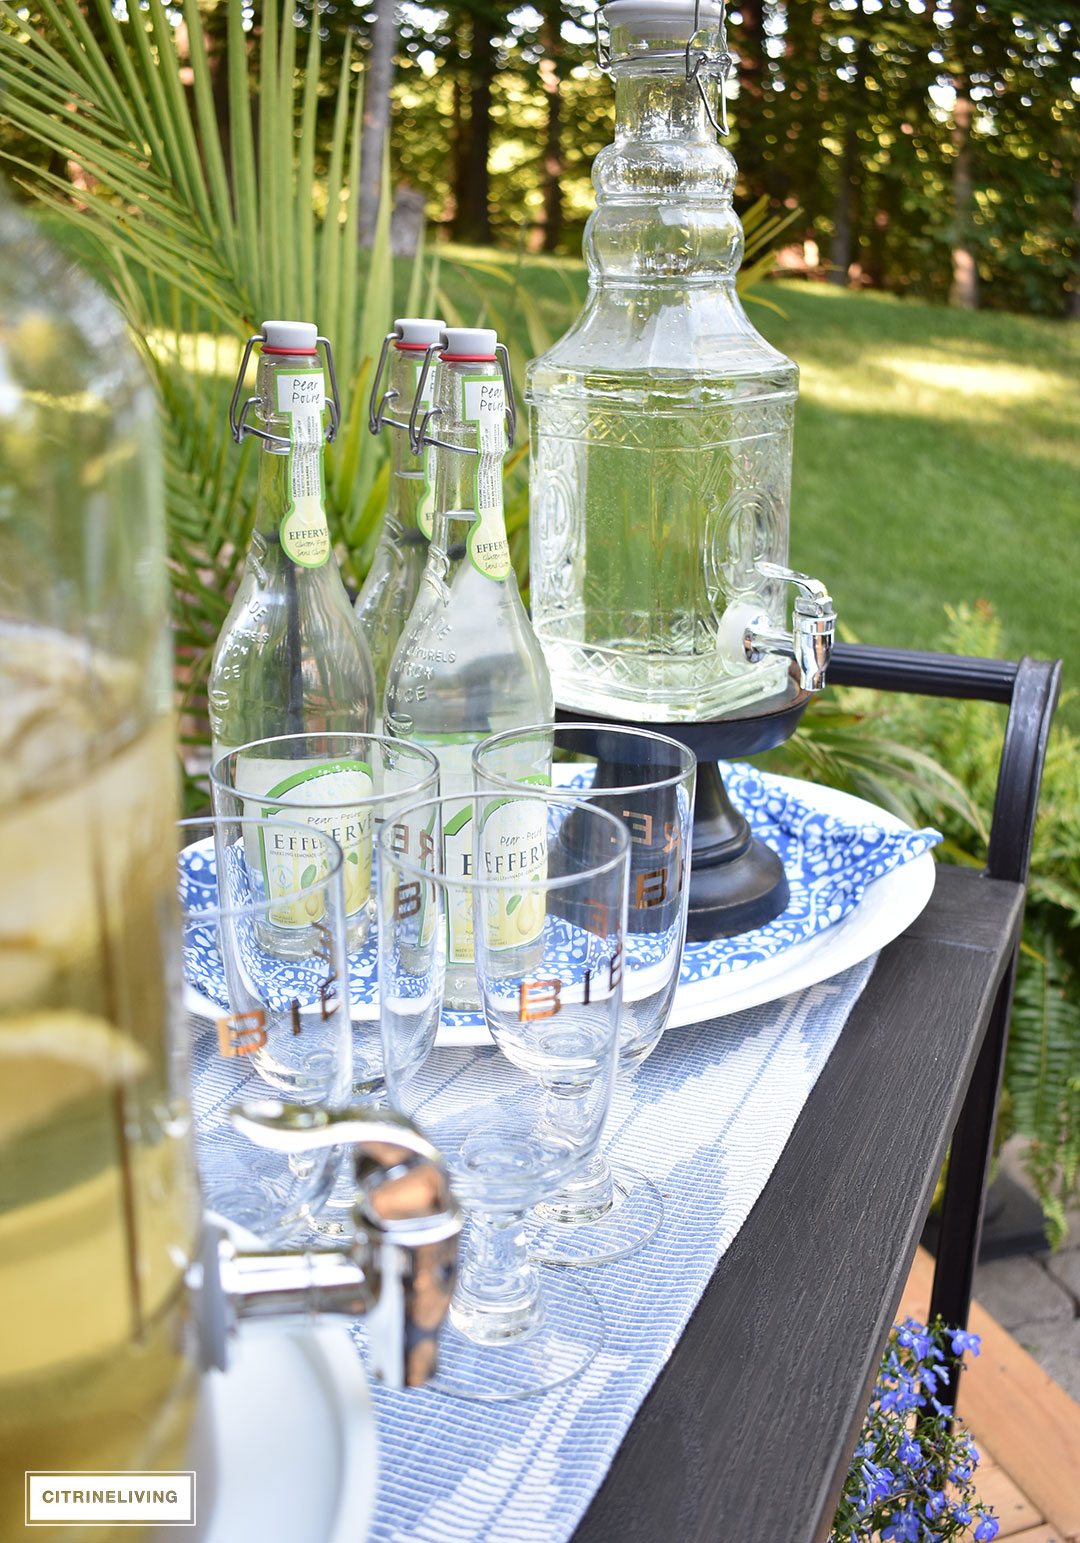 Use an outdoor bar cart layered with vintage inspired glassware and drink dispensers for your Summer entertaining.